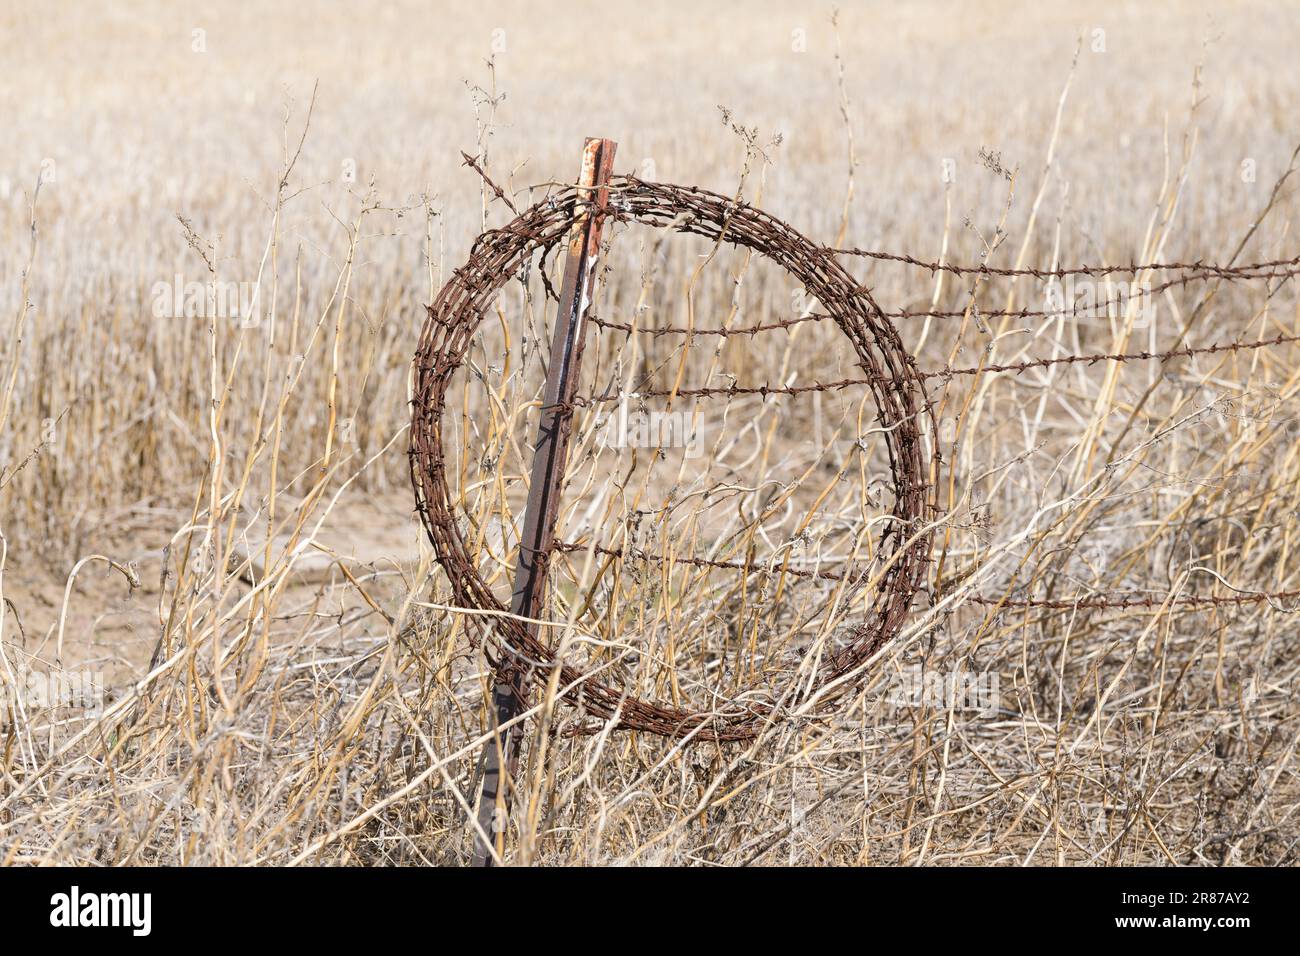 Coil of rusted barbed wire on rust covered fence post against yellow grass with rusting barb wire fencing Stock Photo